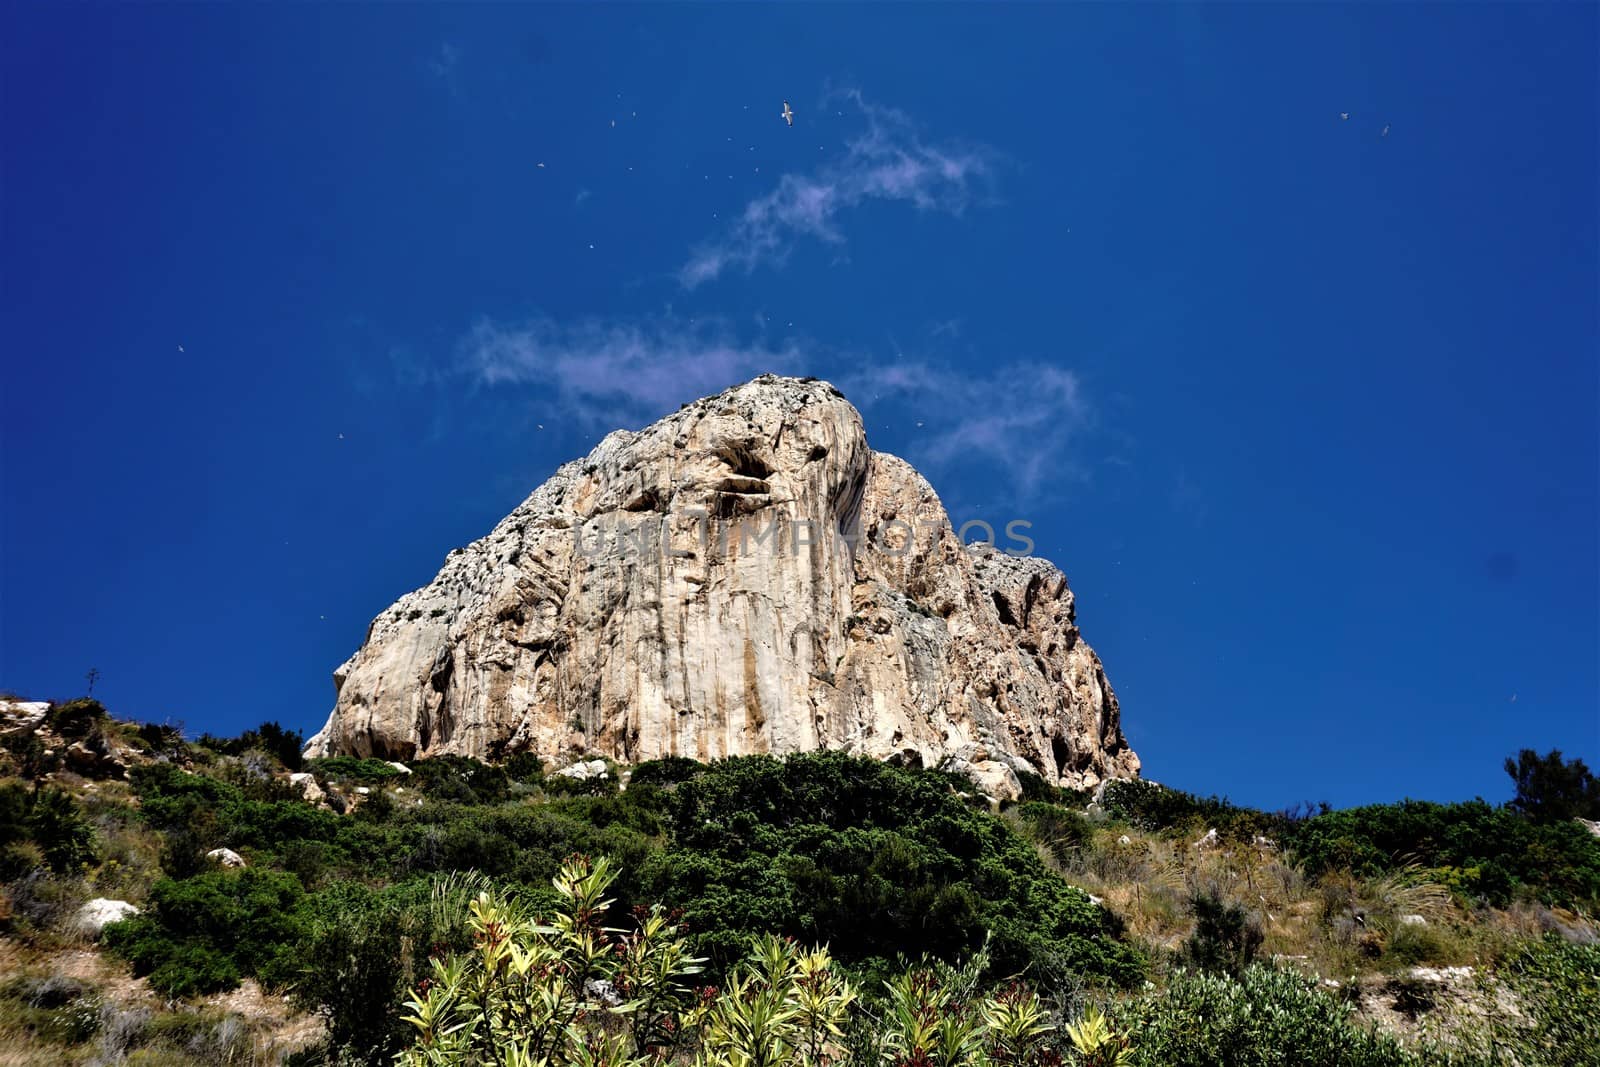 Impressive Ifac mountain in Calpe, Spain by pisces2386